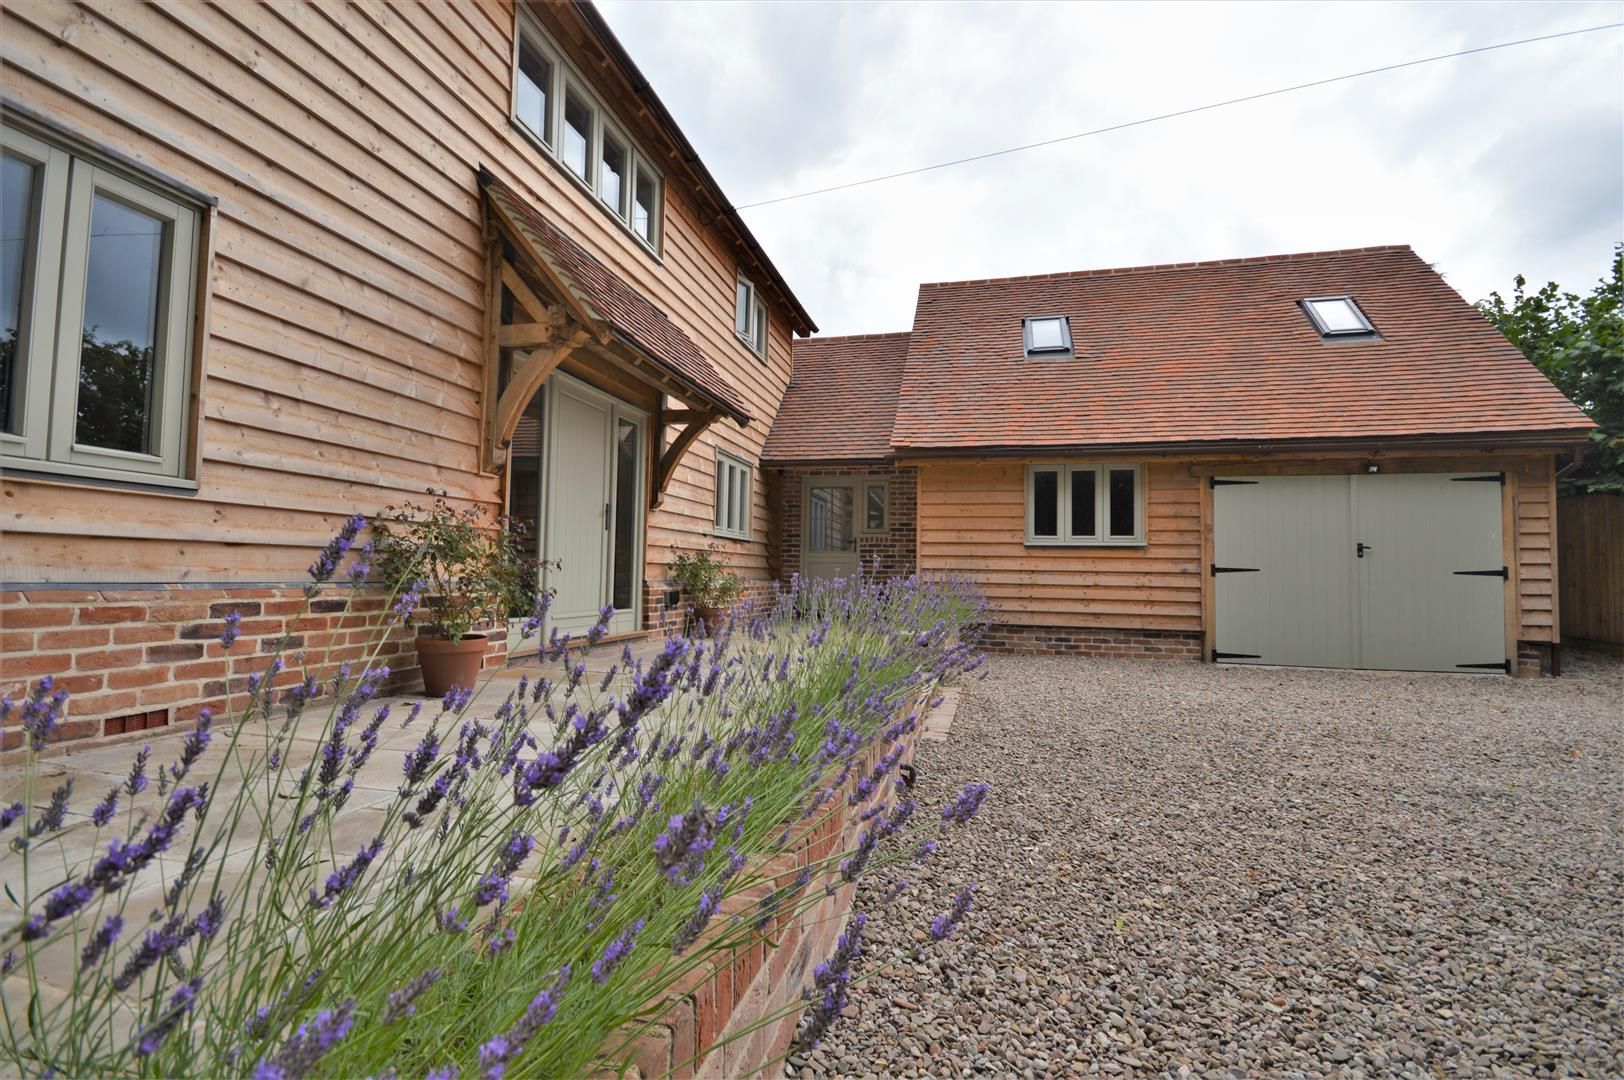 4 bed detached for sale in Bodenham 21